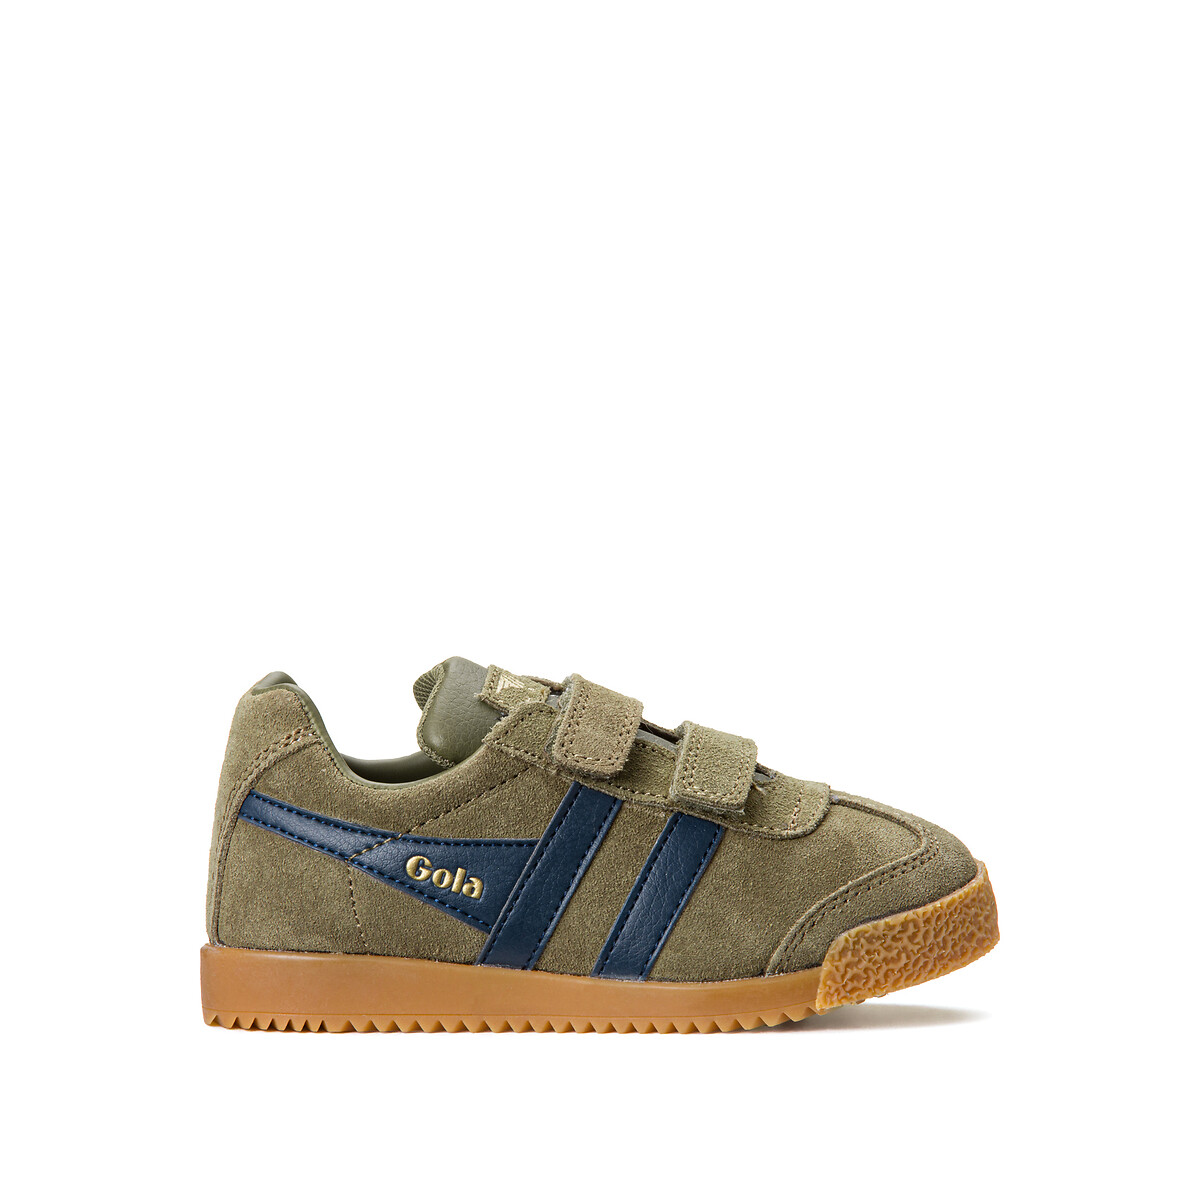 Kids Harrier Strap Suede Touch ’n’ Close Trainers